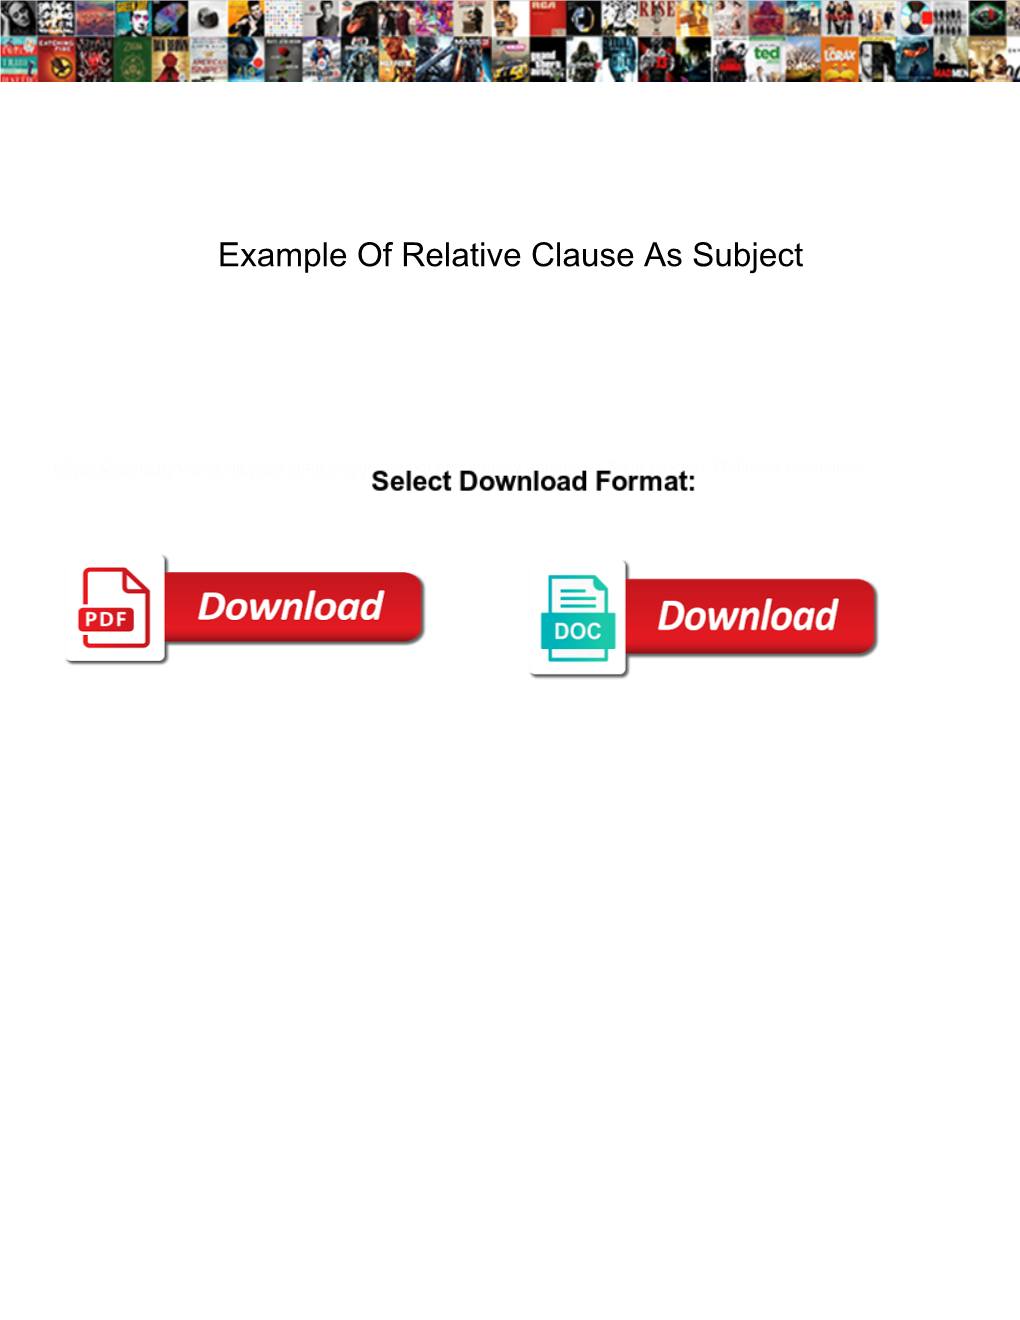 Example of Relative Clause As Subject